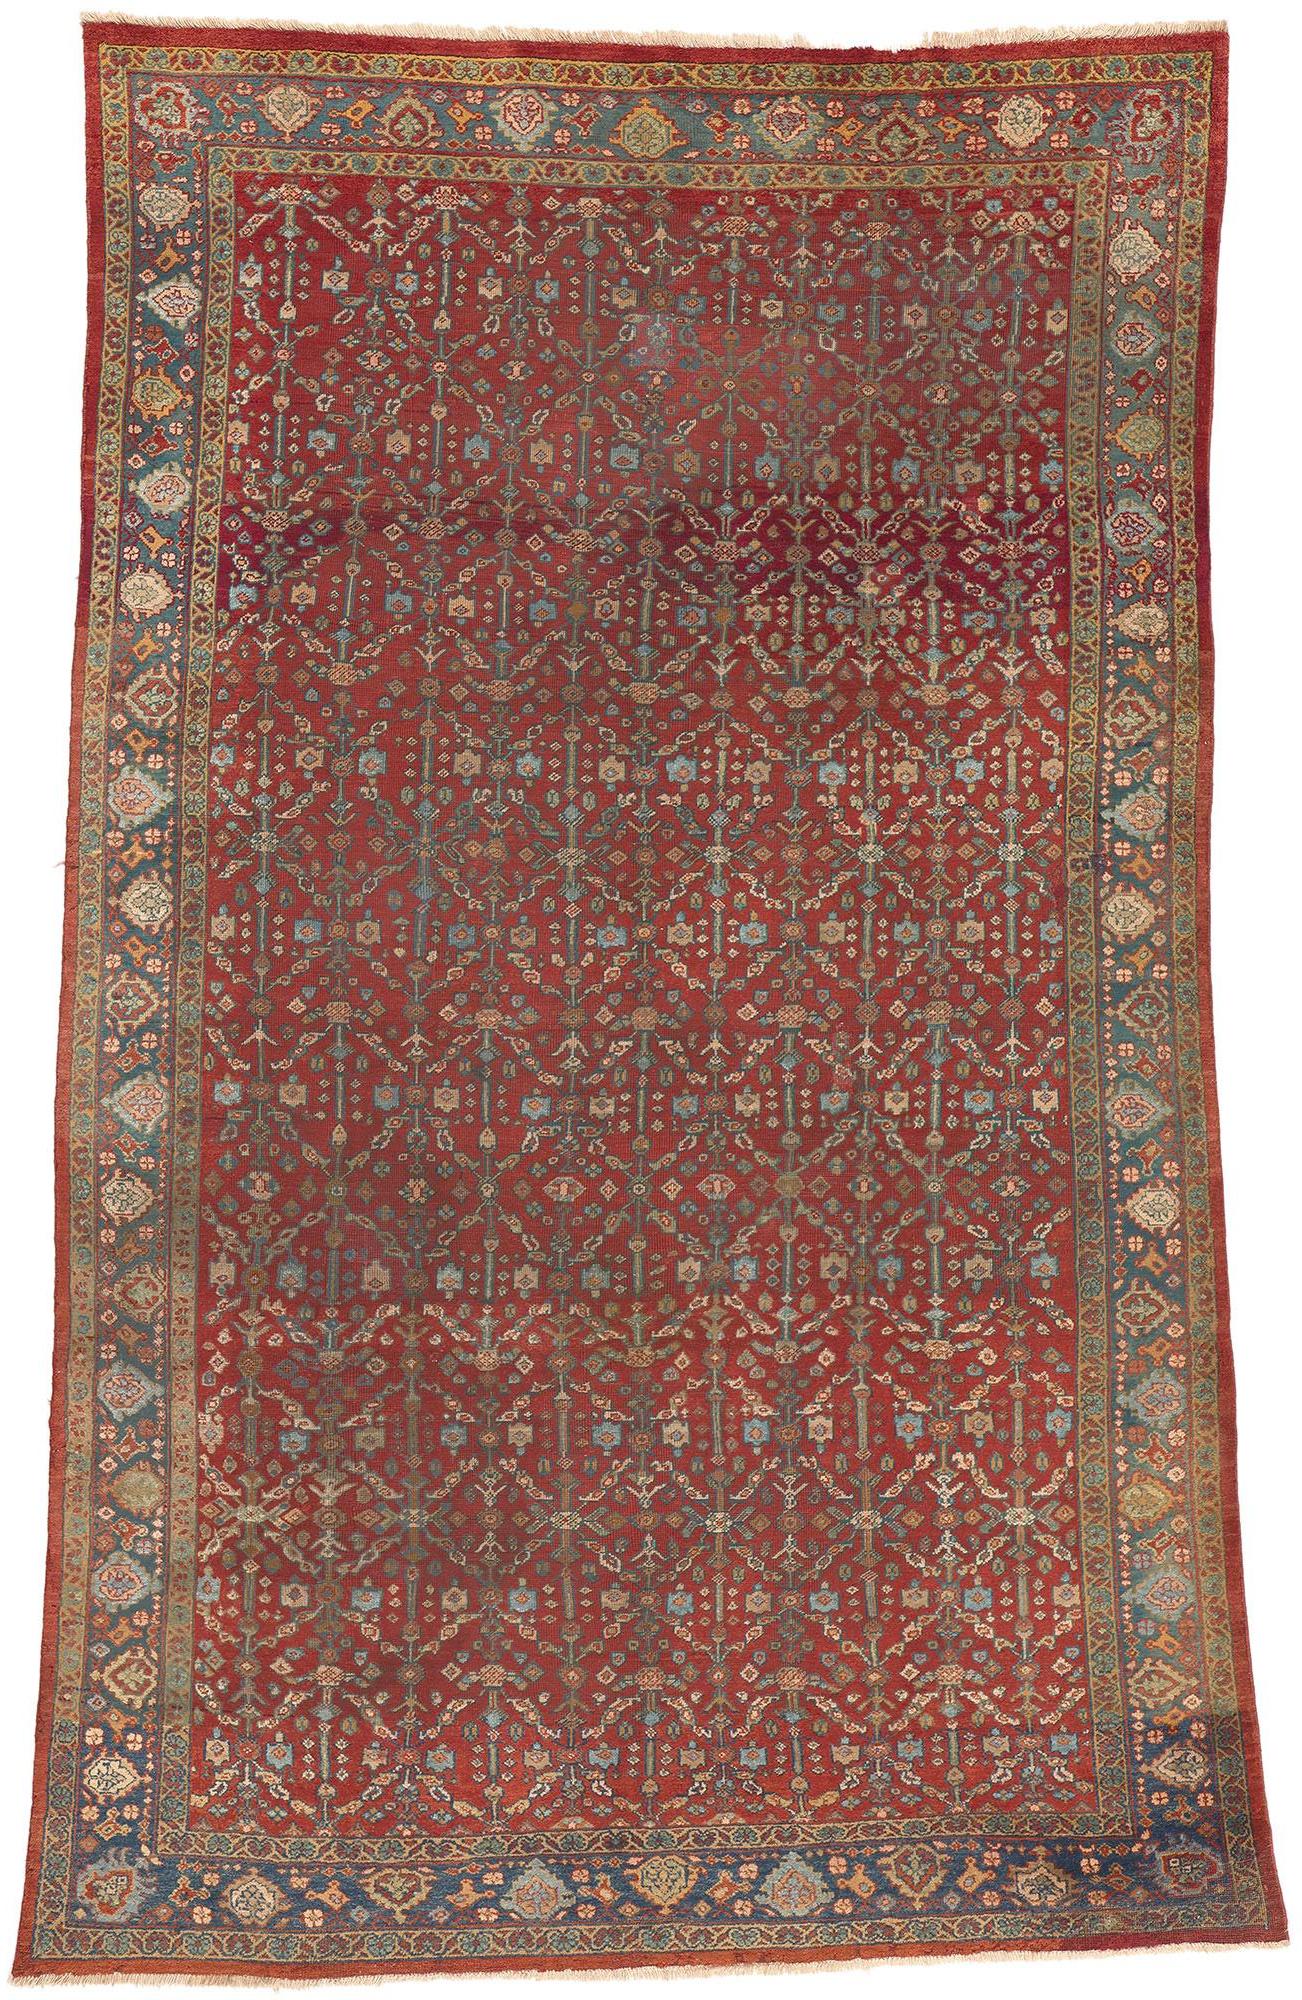 Antique-Worn Persian Mahal Rug, Relaxed Refinement Meets Rustic Sensibility